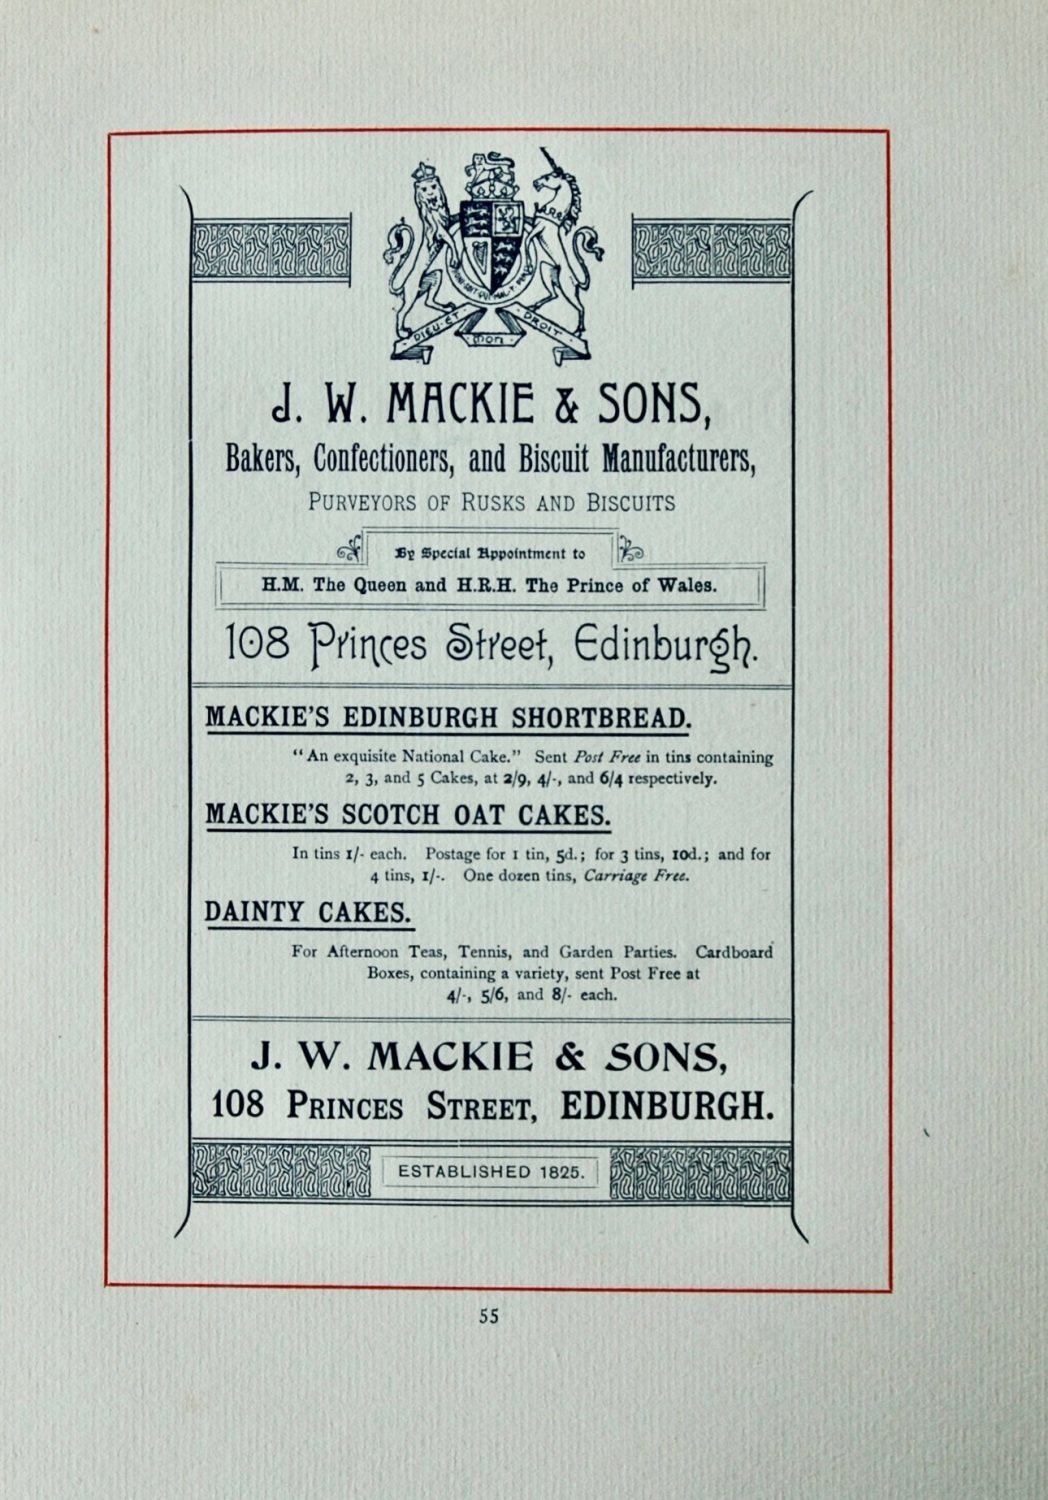 J. W. Mackie & Sons,  Bakers, Confectioners, and Biscuit Manufacturers.  10